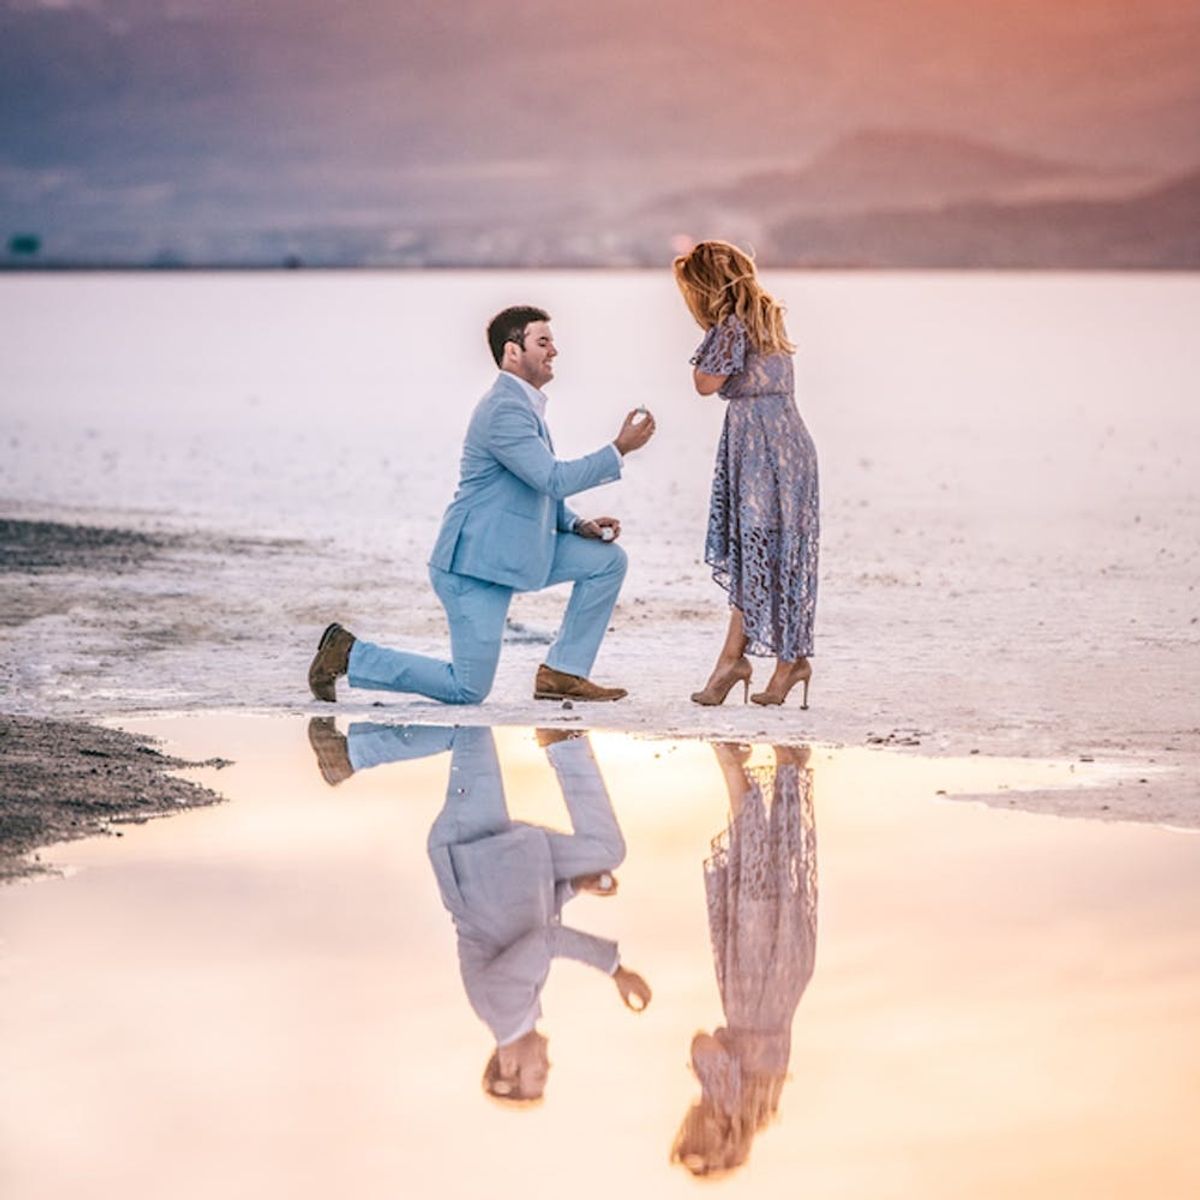 This Heartwarming Salt Flats Proposal Story Is Seriously Breathtaking